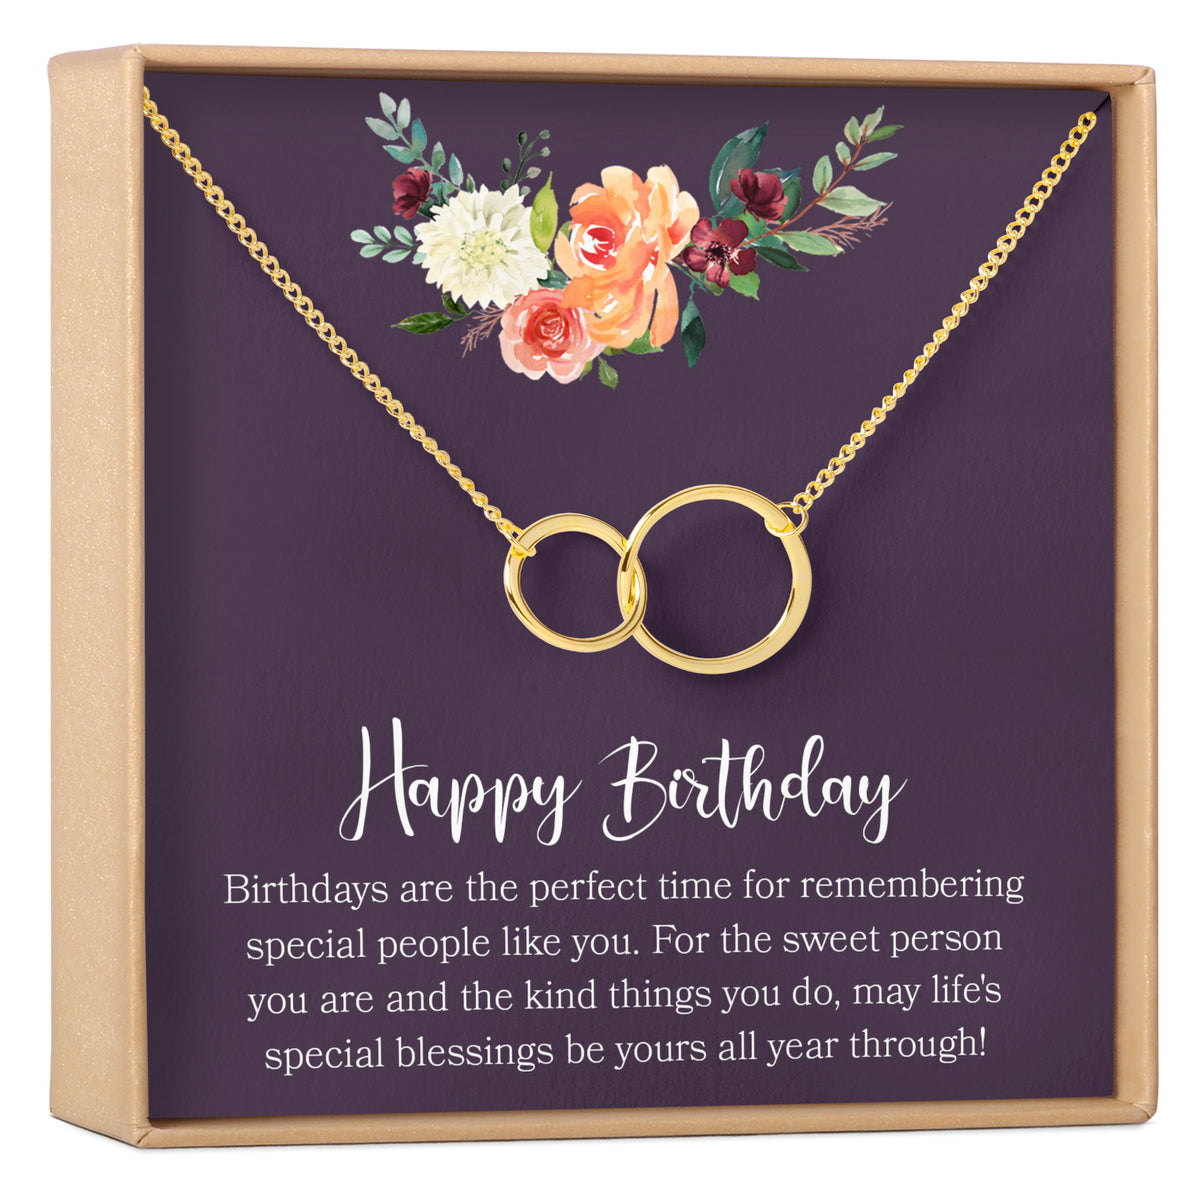 luxury birthday gifts for friends: Surprise Your Best Friend with 6 Luxury Birthday  Gifts For Friends - The Economic Times